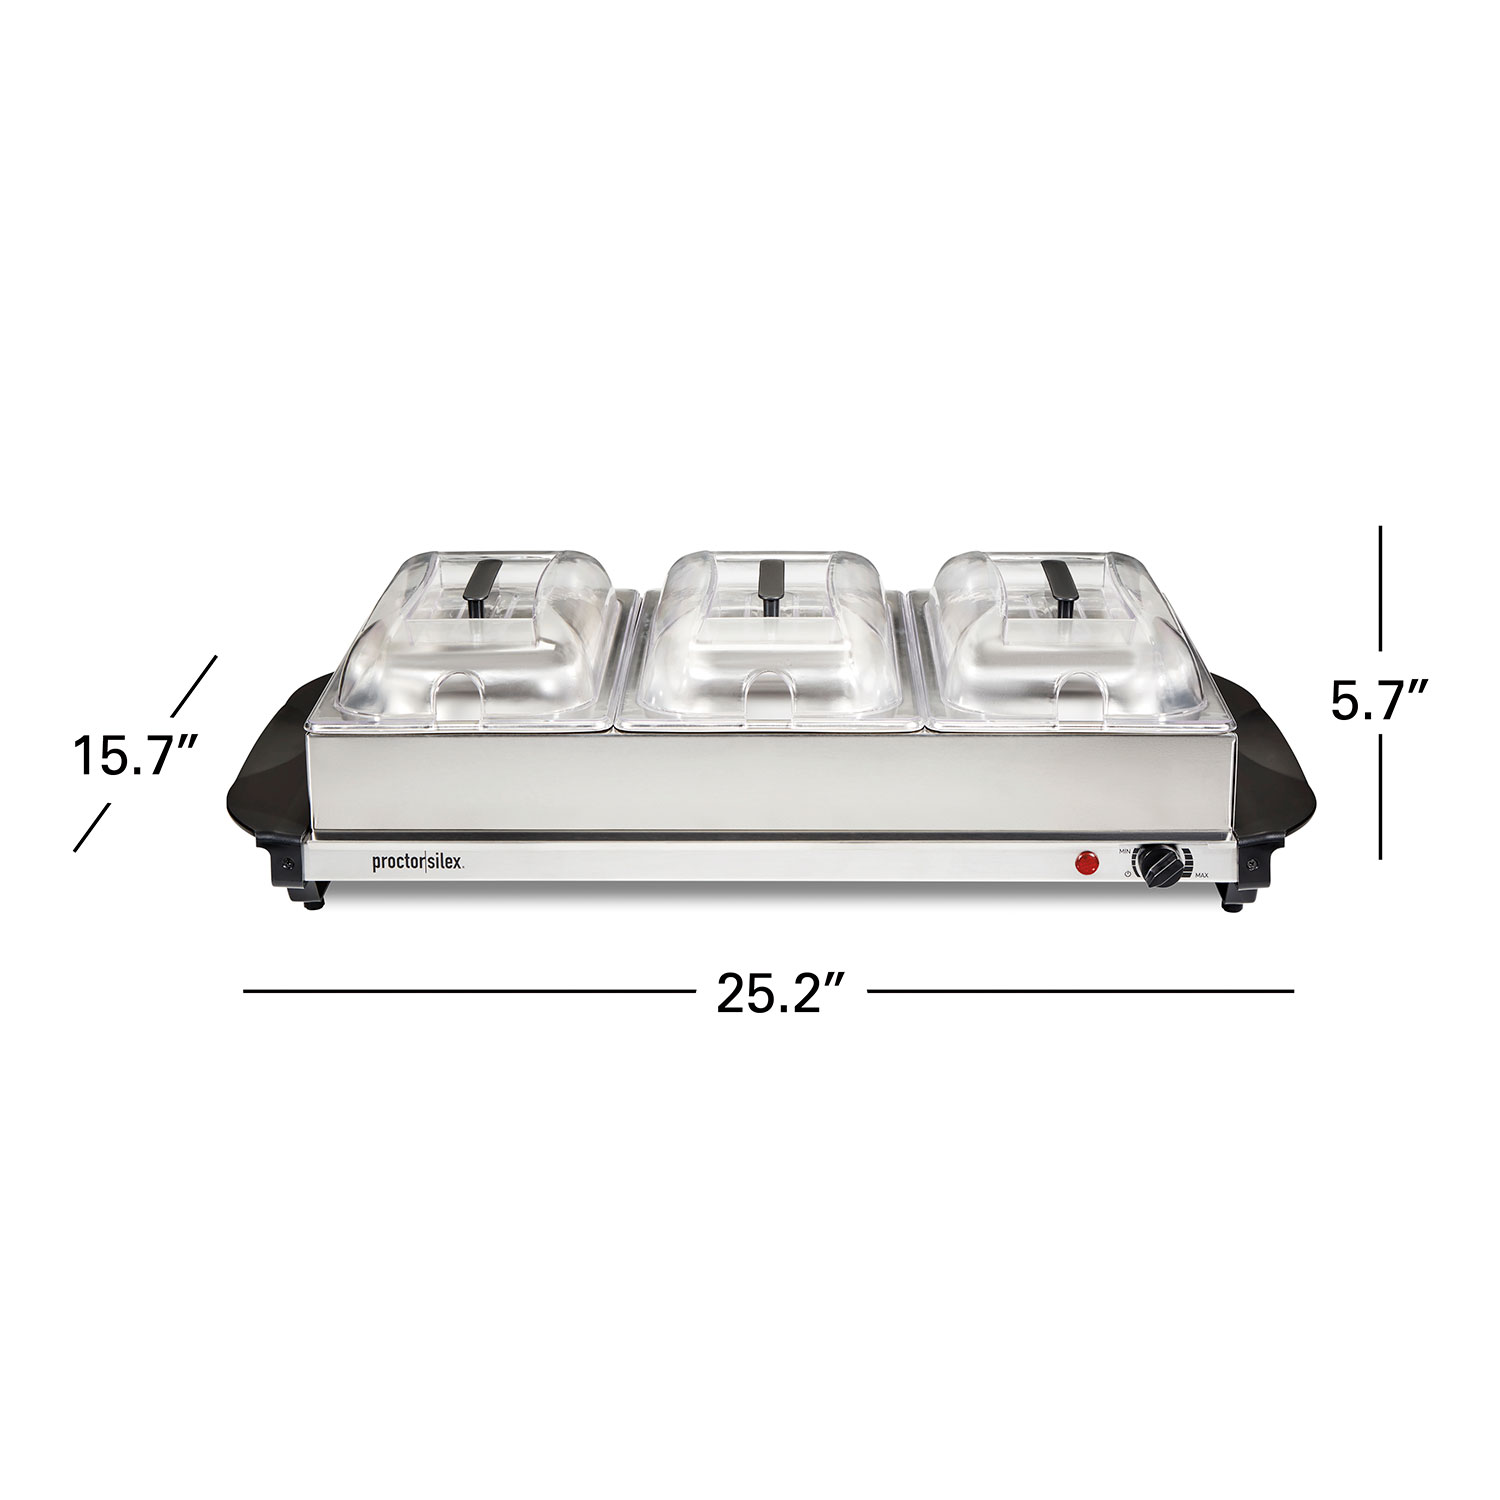 Family-size Triple Buffet Server with Food Warmer